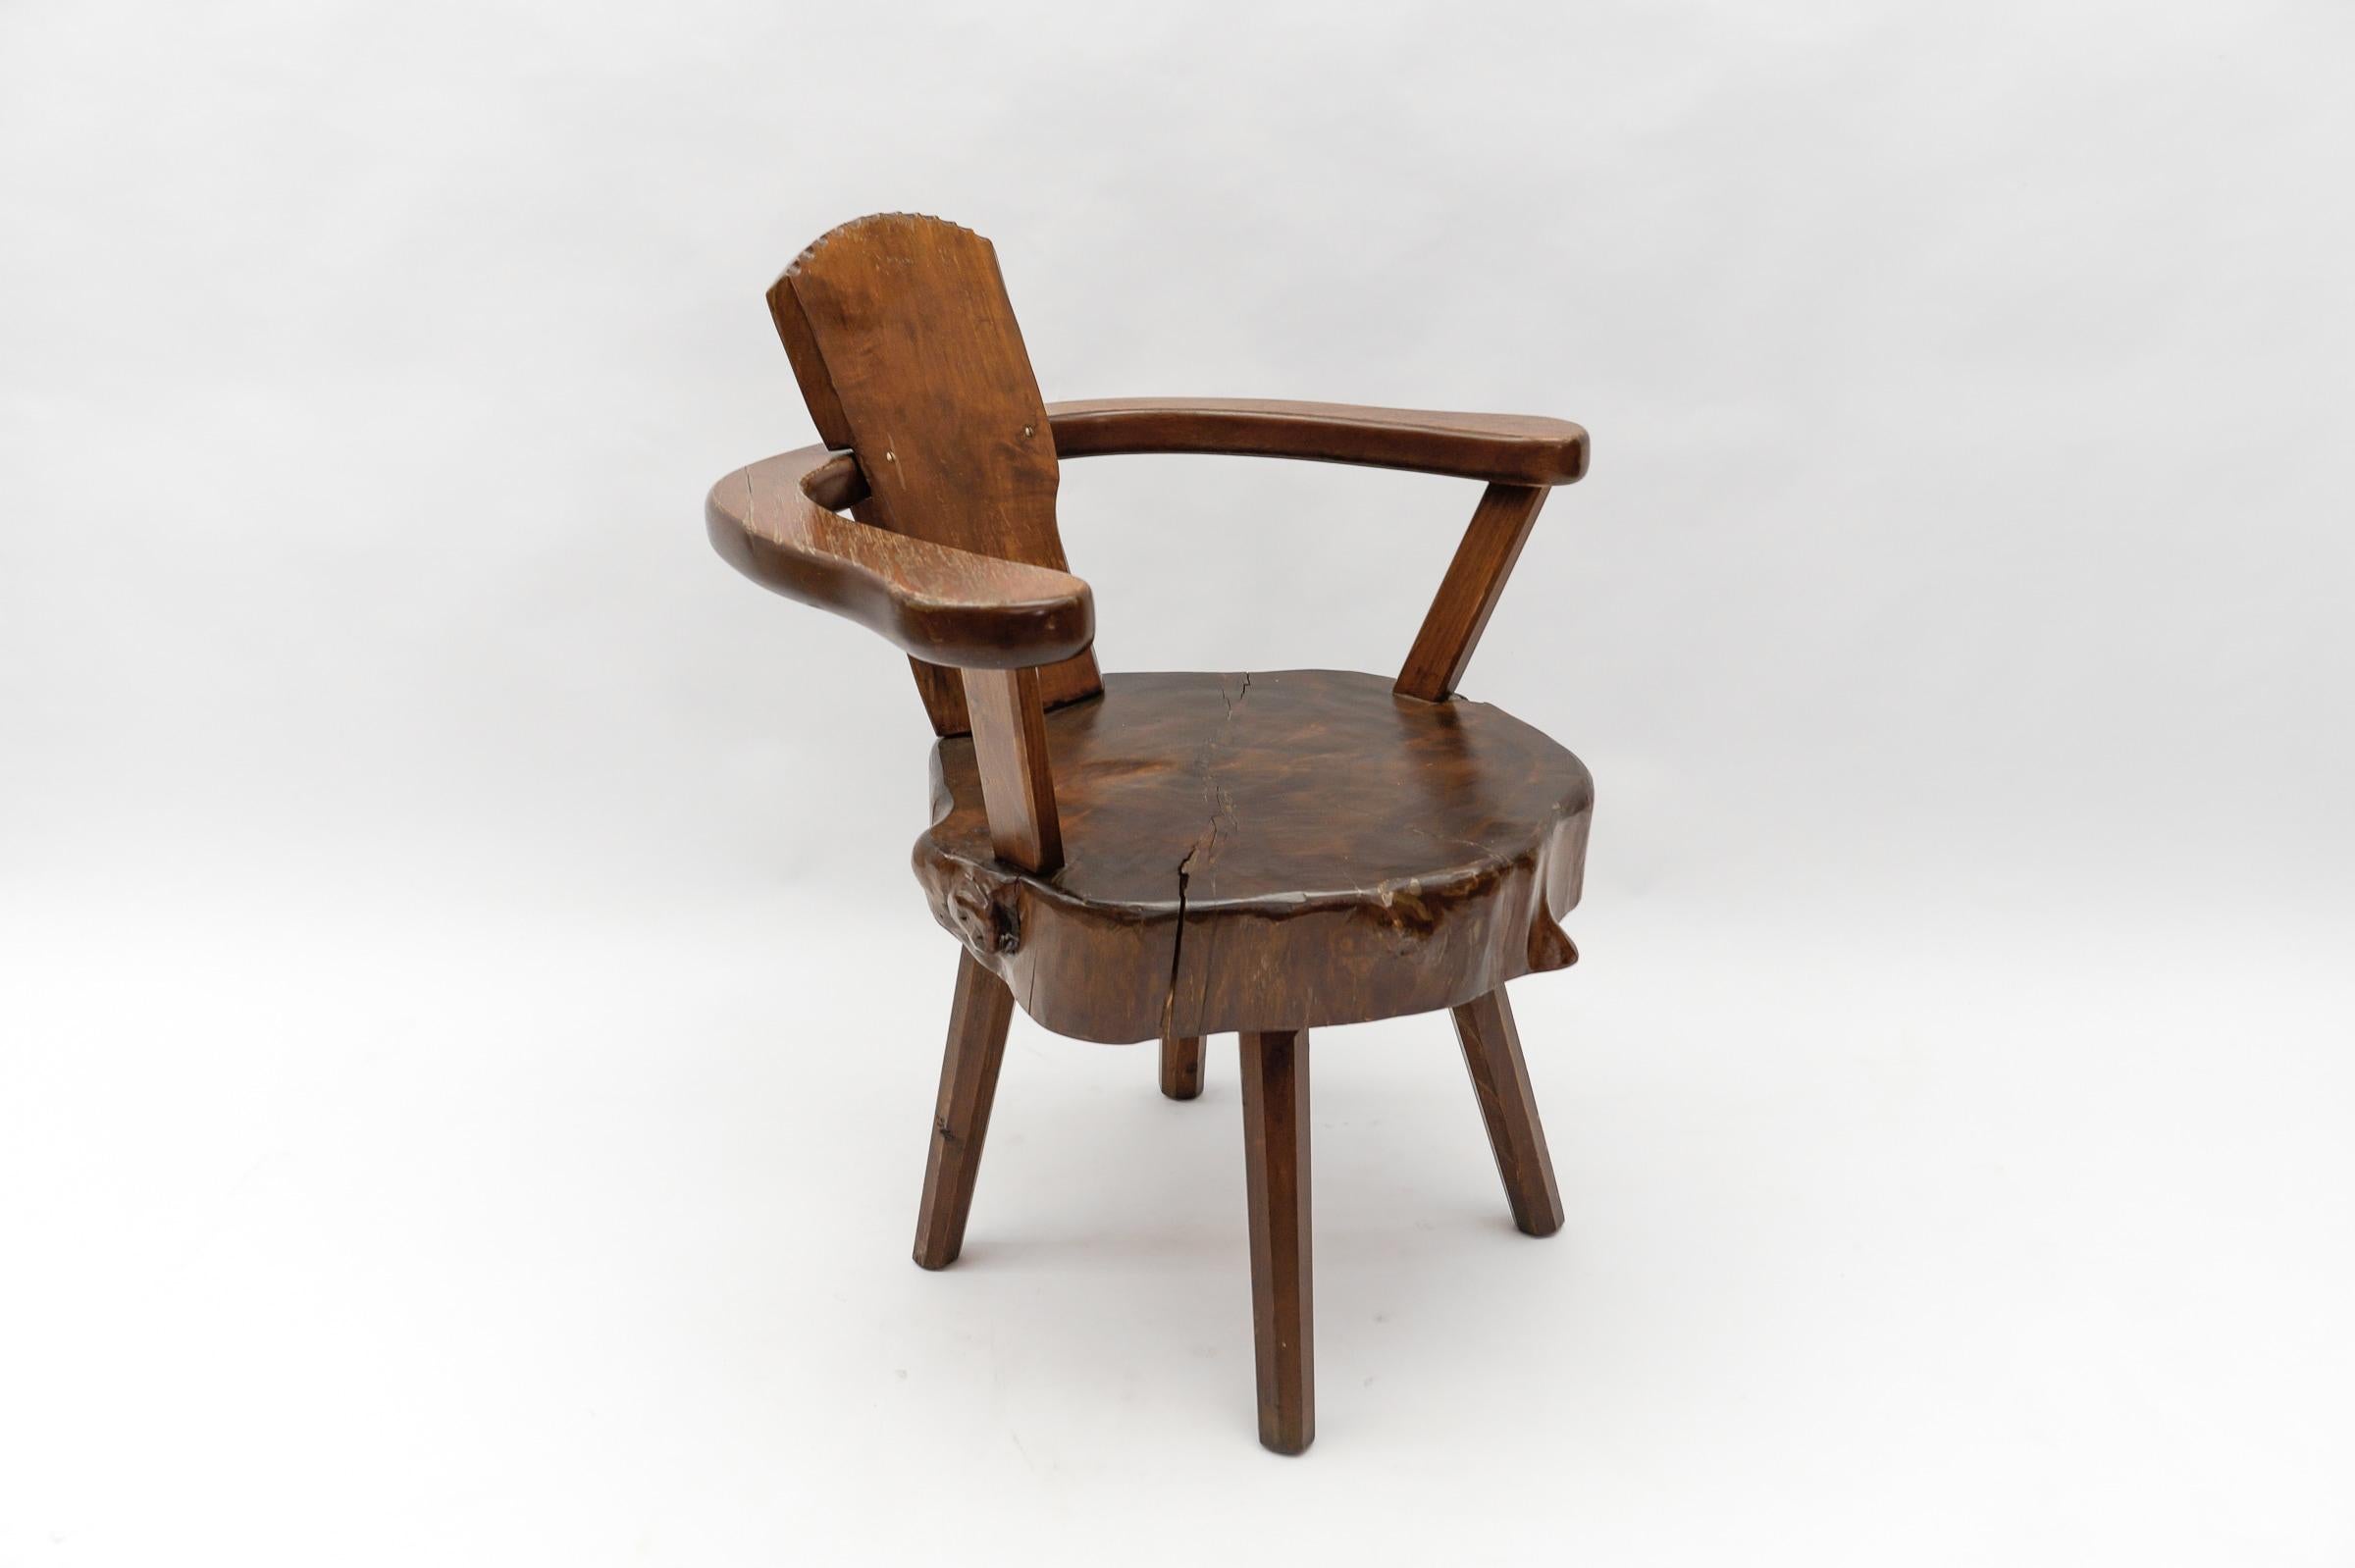 Rustic Mid-Century Modern French Wooden Armchair, Pierre Chapo Attributed, 1960s For Sale